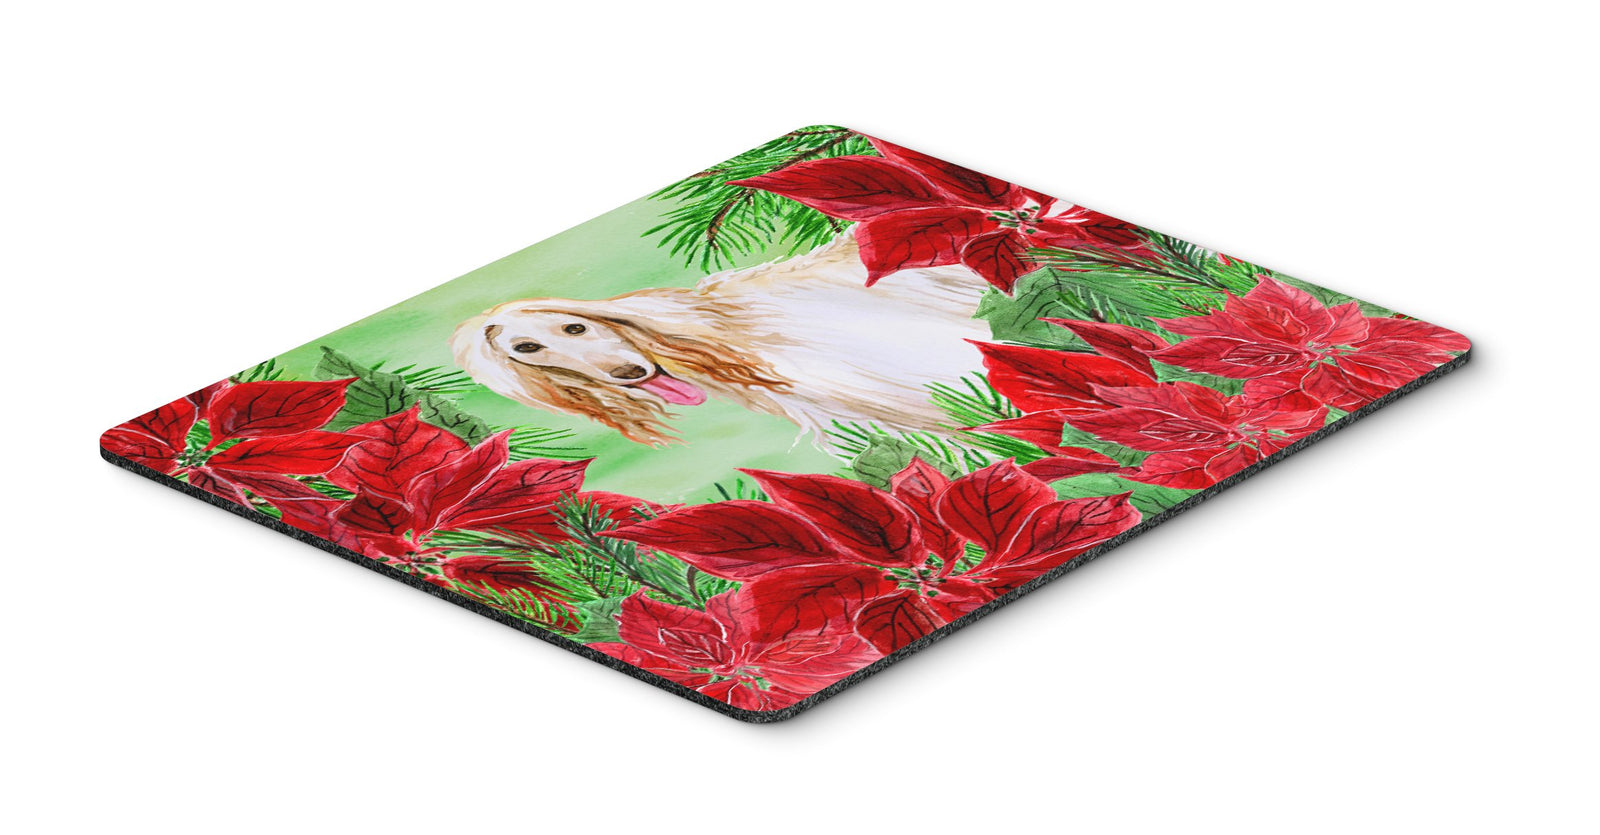 Afghan Hound Poinsettas Mouse Pad, Hot Pad or Trivet CK1350MP by Caroline's Treasures